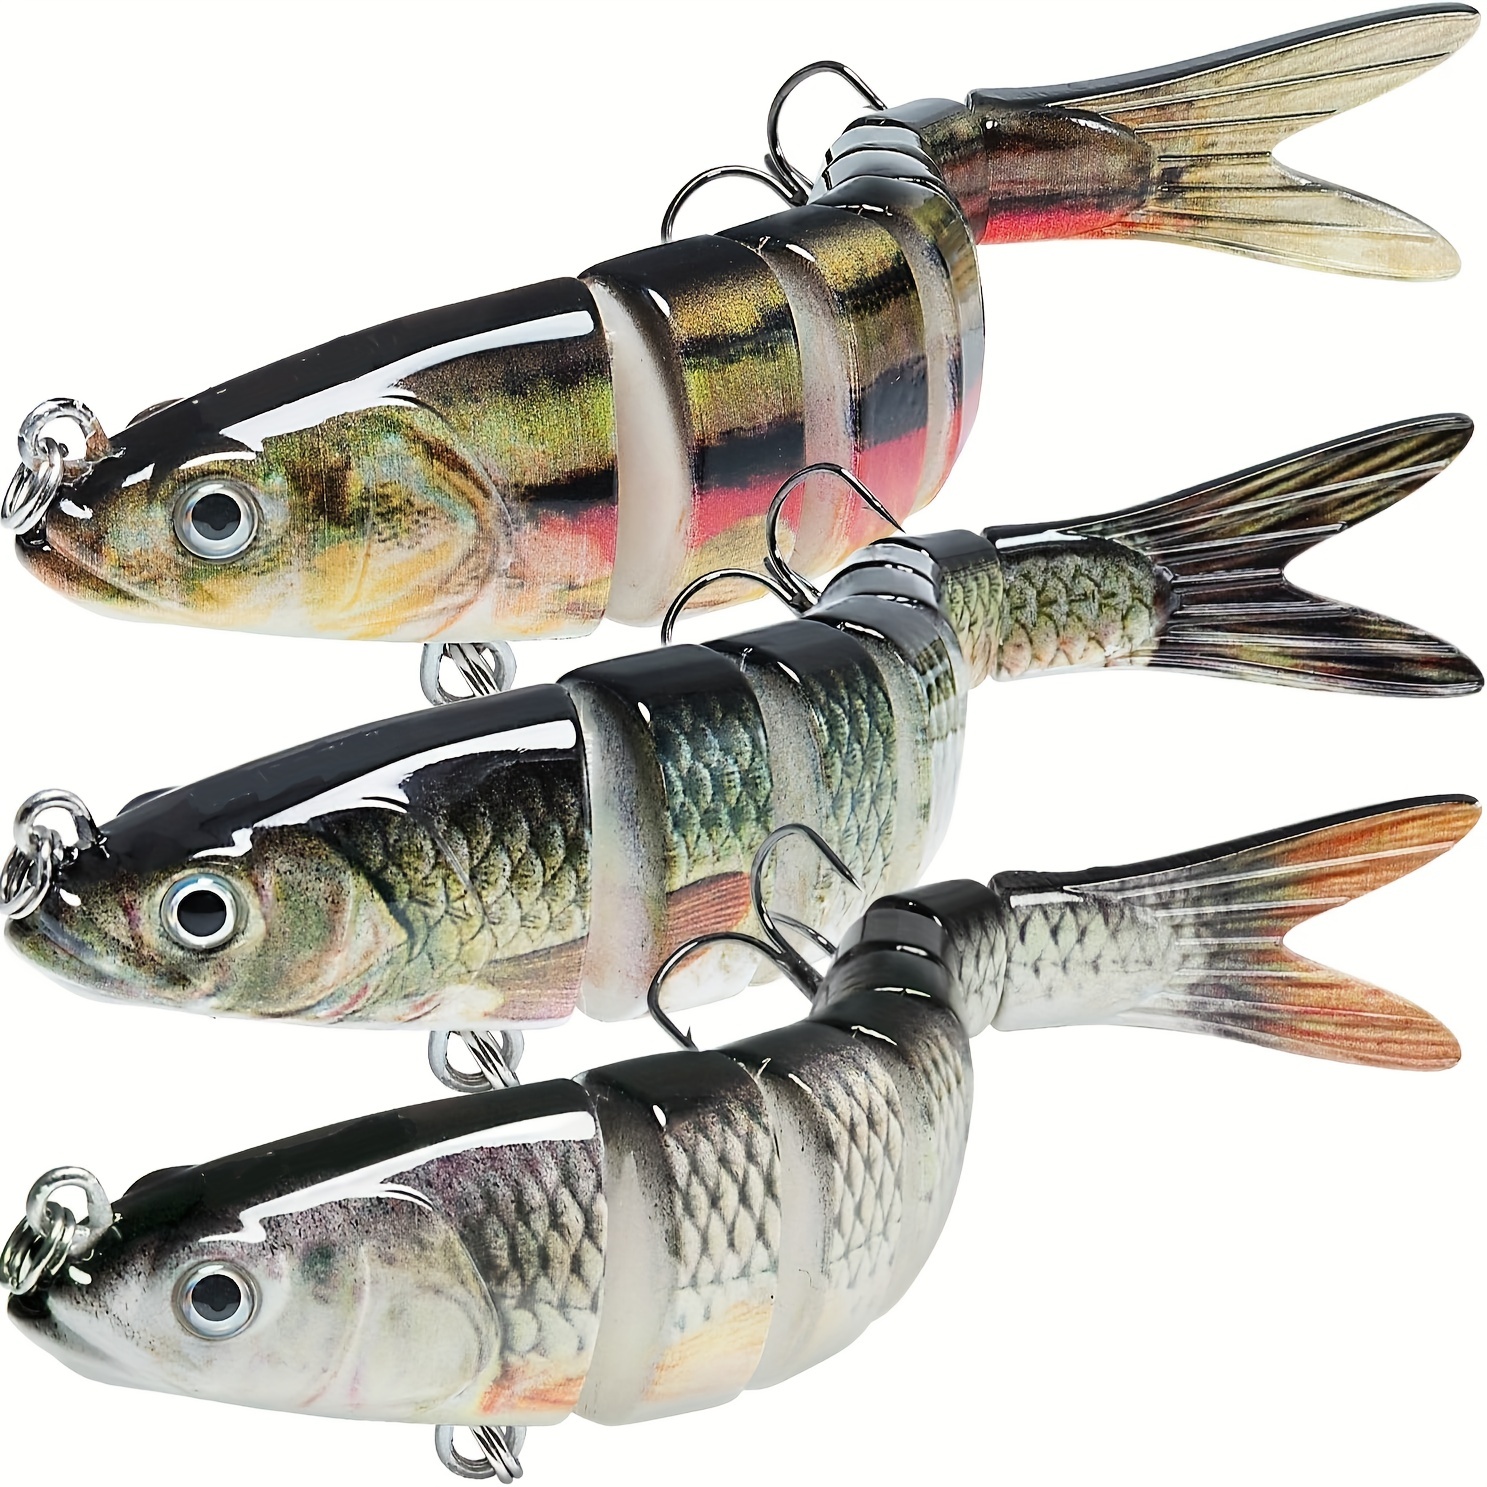 TRUSCEND Fishing Lures for Bass Trout Multi Jointed Swimbaits Slow Sinking Bionic Swimming Lures Bass Freshwater Saltwater Bass Lifelike Fishing Lures